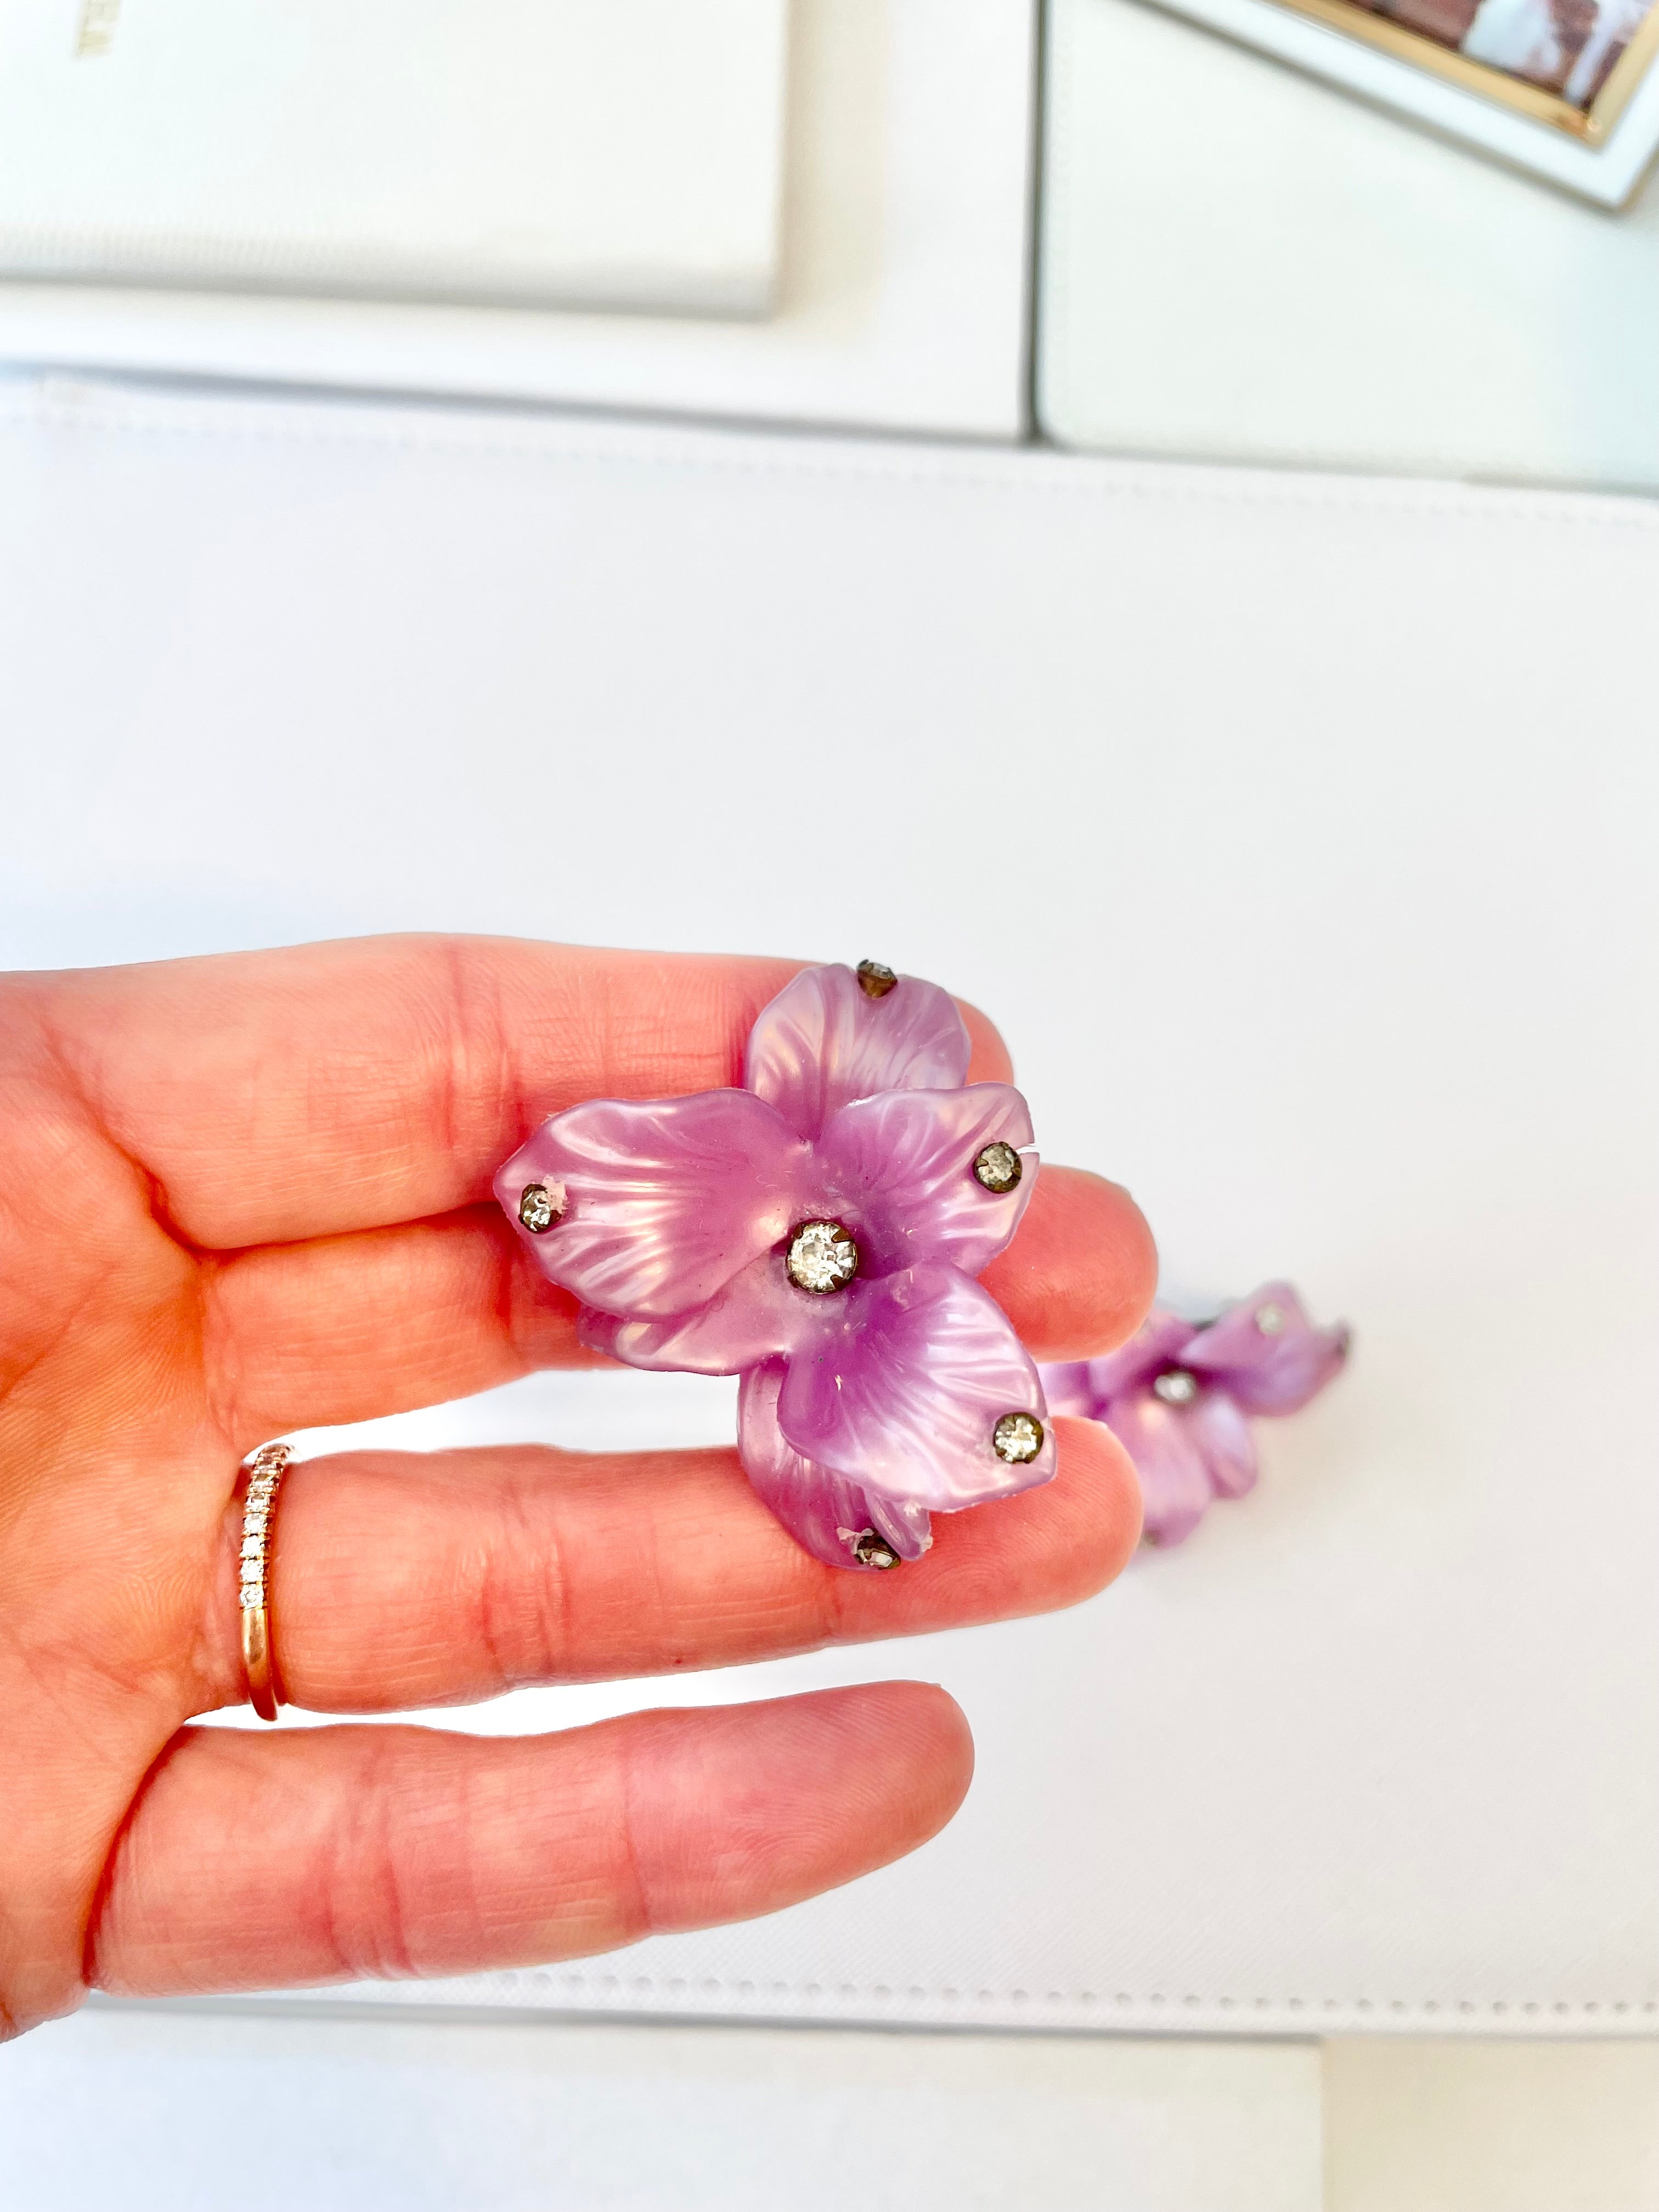 These 1960's divine purple sculpted flowers are truly something! .... so chic